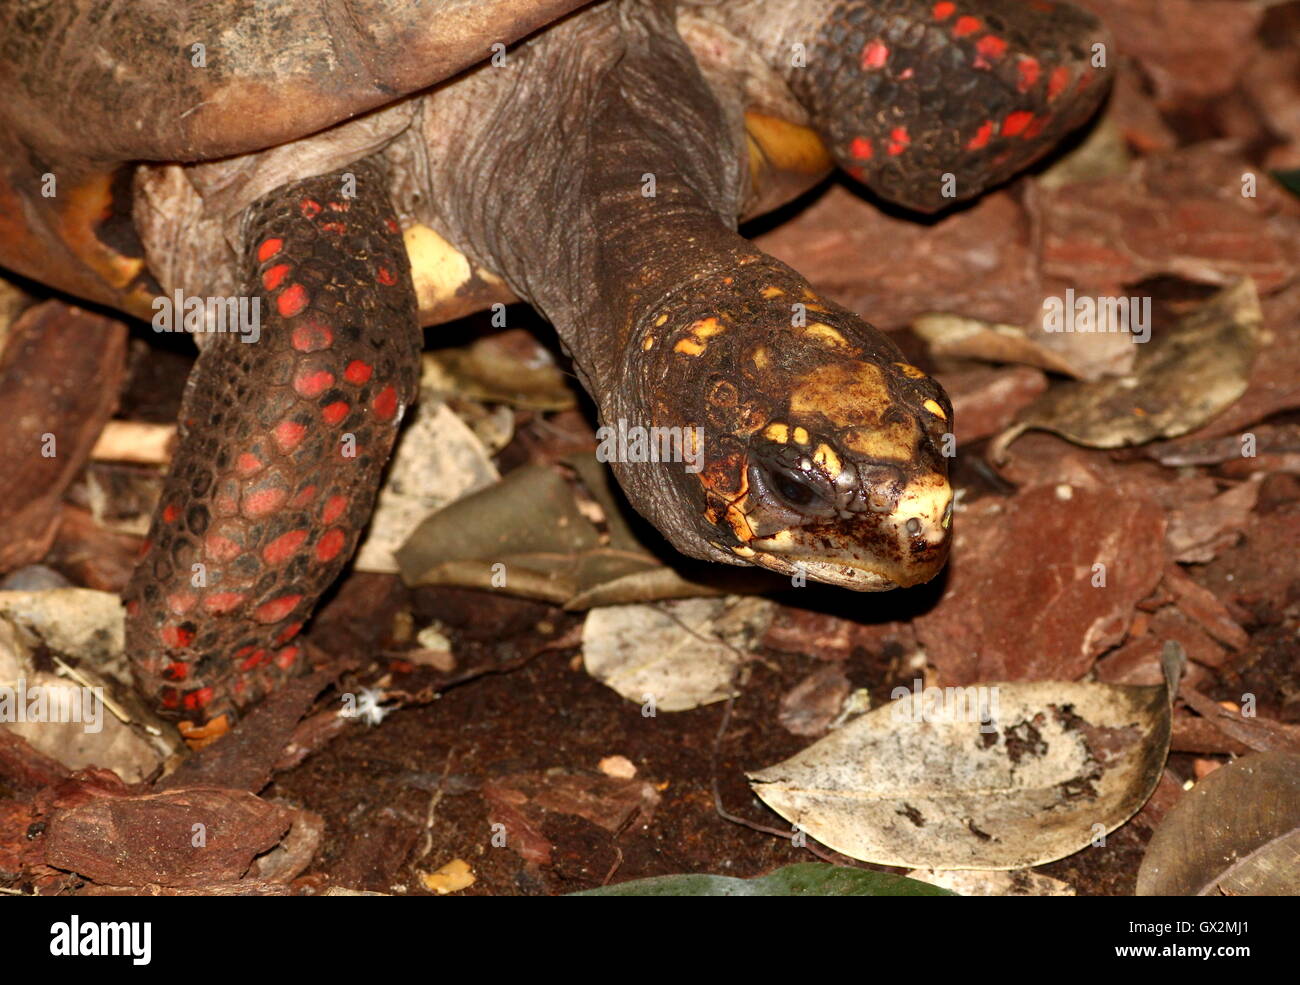 South American Red footed tortoise (Chelonoidis carbonaria) showing head and red feet. Stock Photo